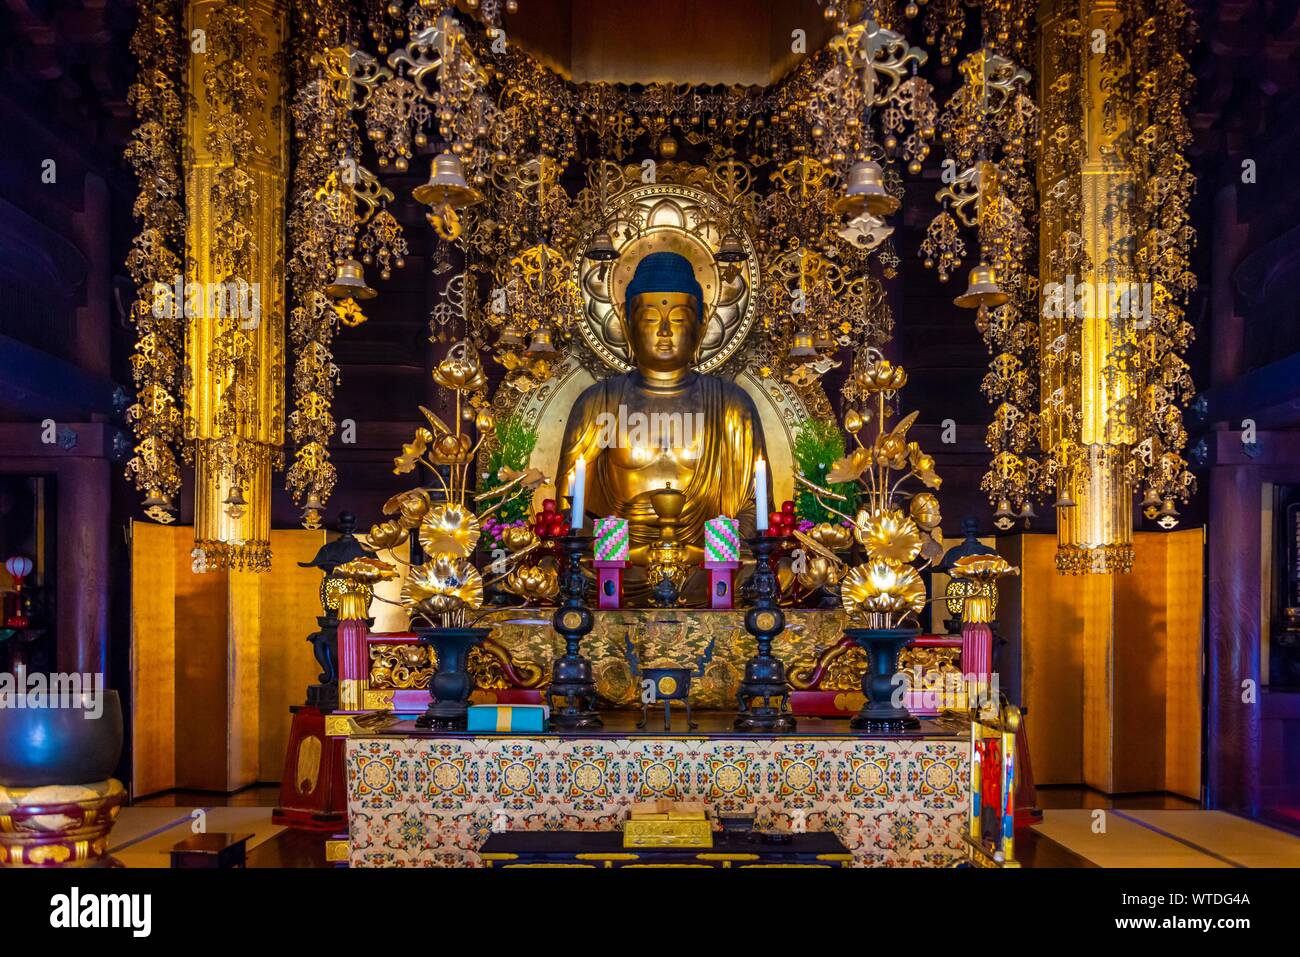 Golden Buddha Statue in Chion-in Temple, Kyoto, Japan Stock Photo